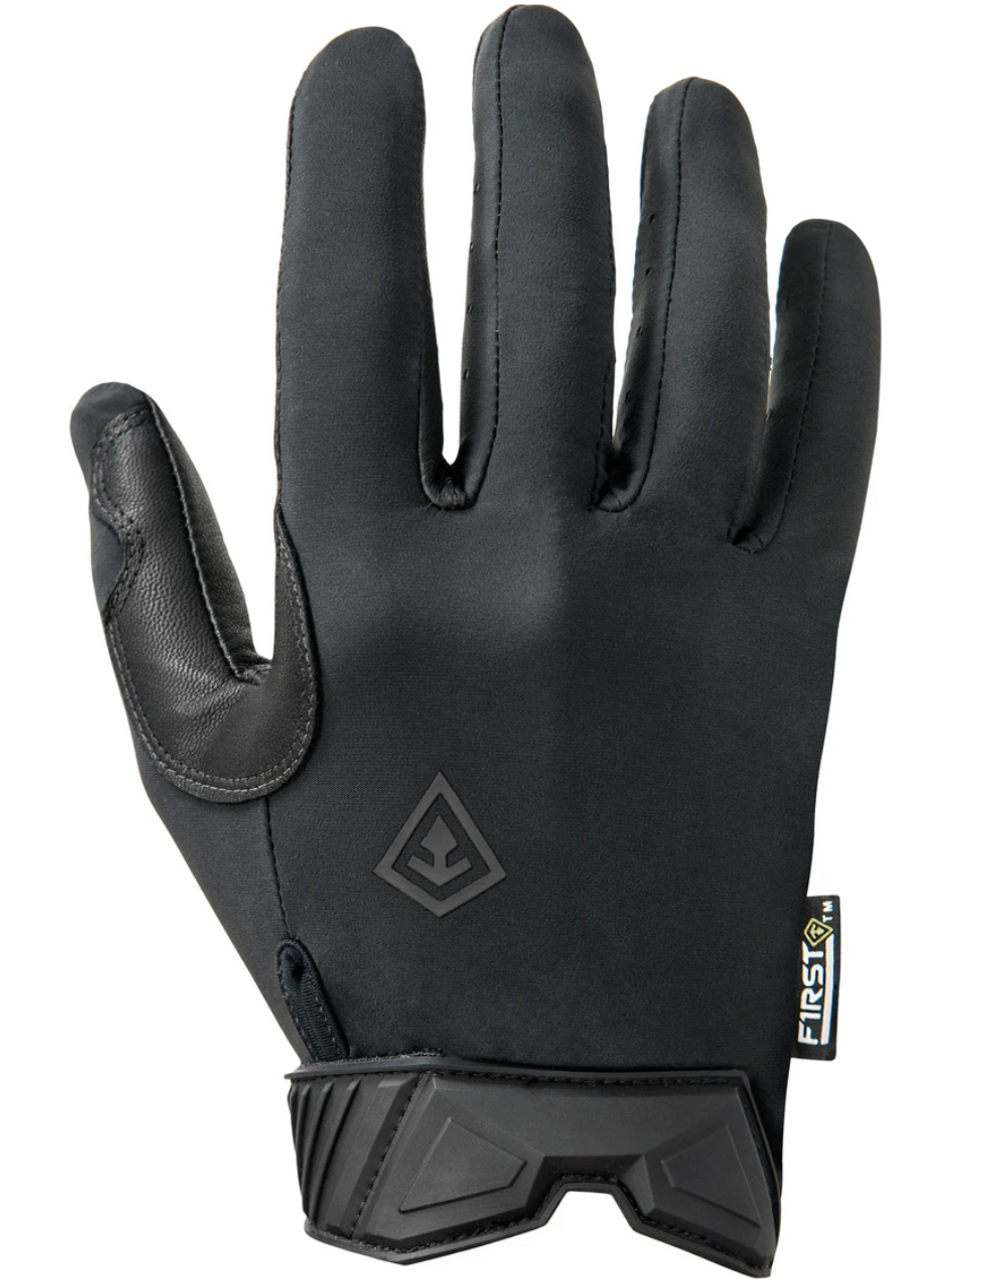 Finally, tactical gloves that allow you to act with maximum speed and precision. First Tactical’s Lightweight Patrol Glove combines extreme tactility with long-term durability to become your essential tool of the trade. Expert design serves well without slowing you down—you’ll never have to worry about a slip of the grip or cumbersome fit. Whatever the task at hand, this glove will perform with excellence.